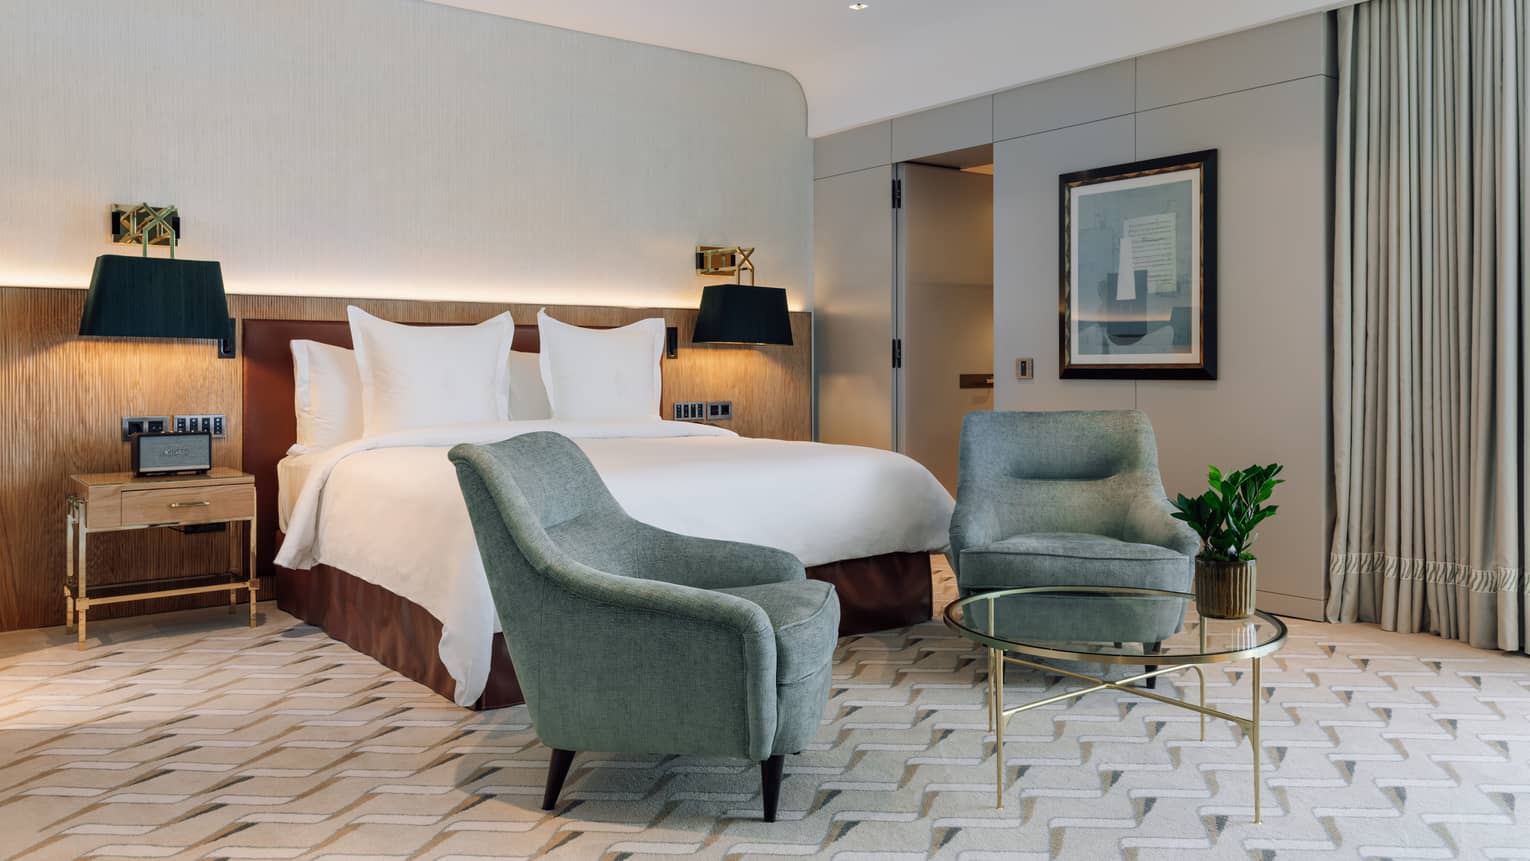 Hotel room with king bed, two turquoise arm chairs and brass glass table